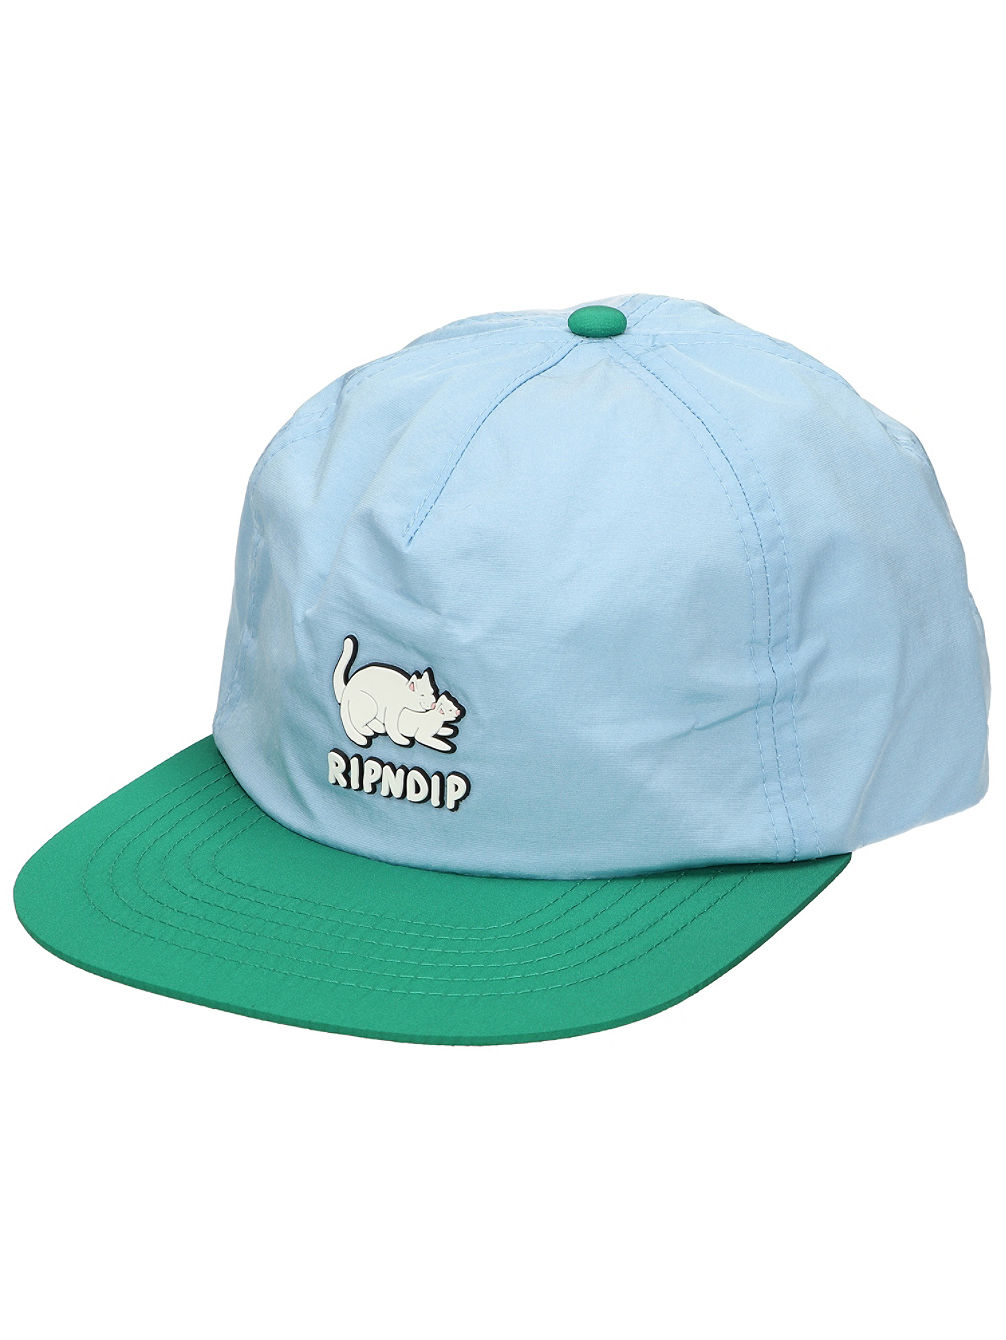 Two Nerms 5 Panel Keps